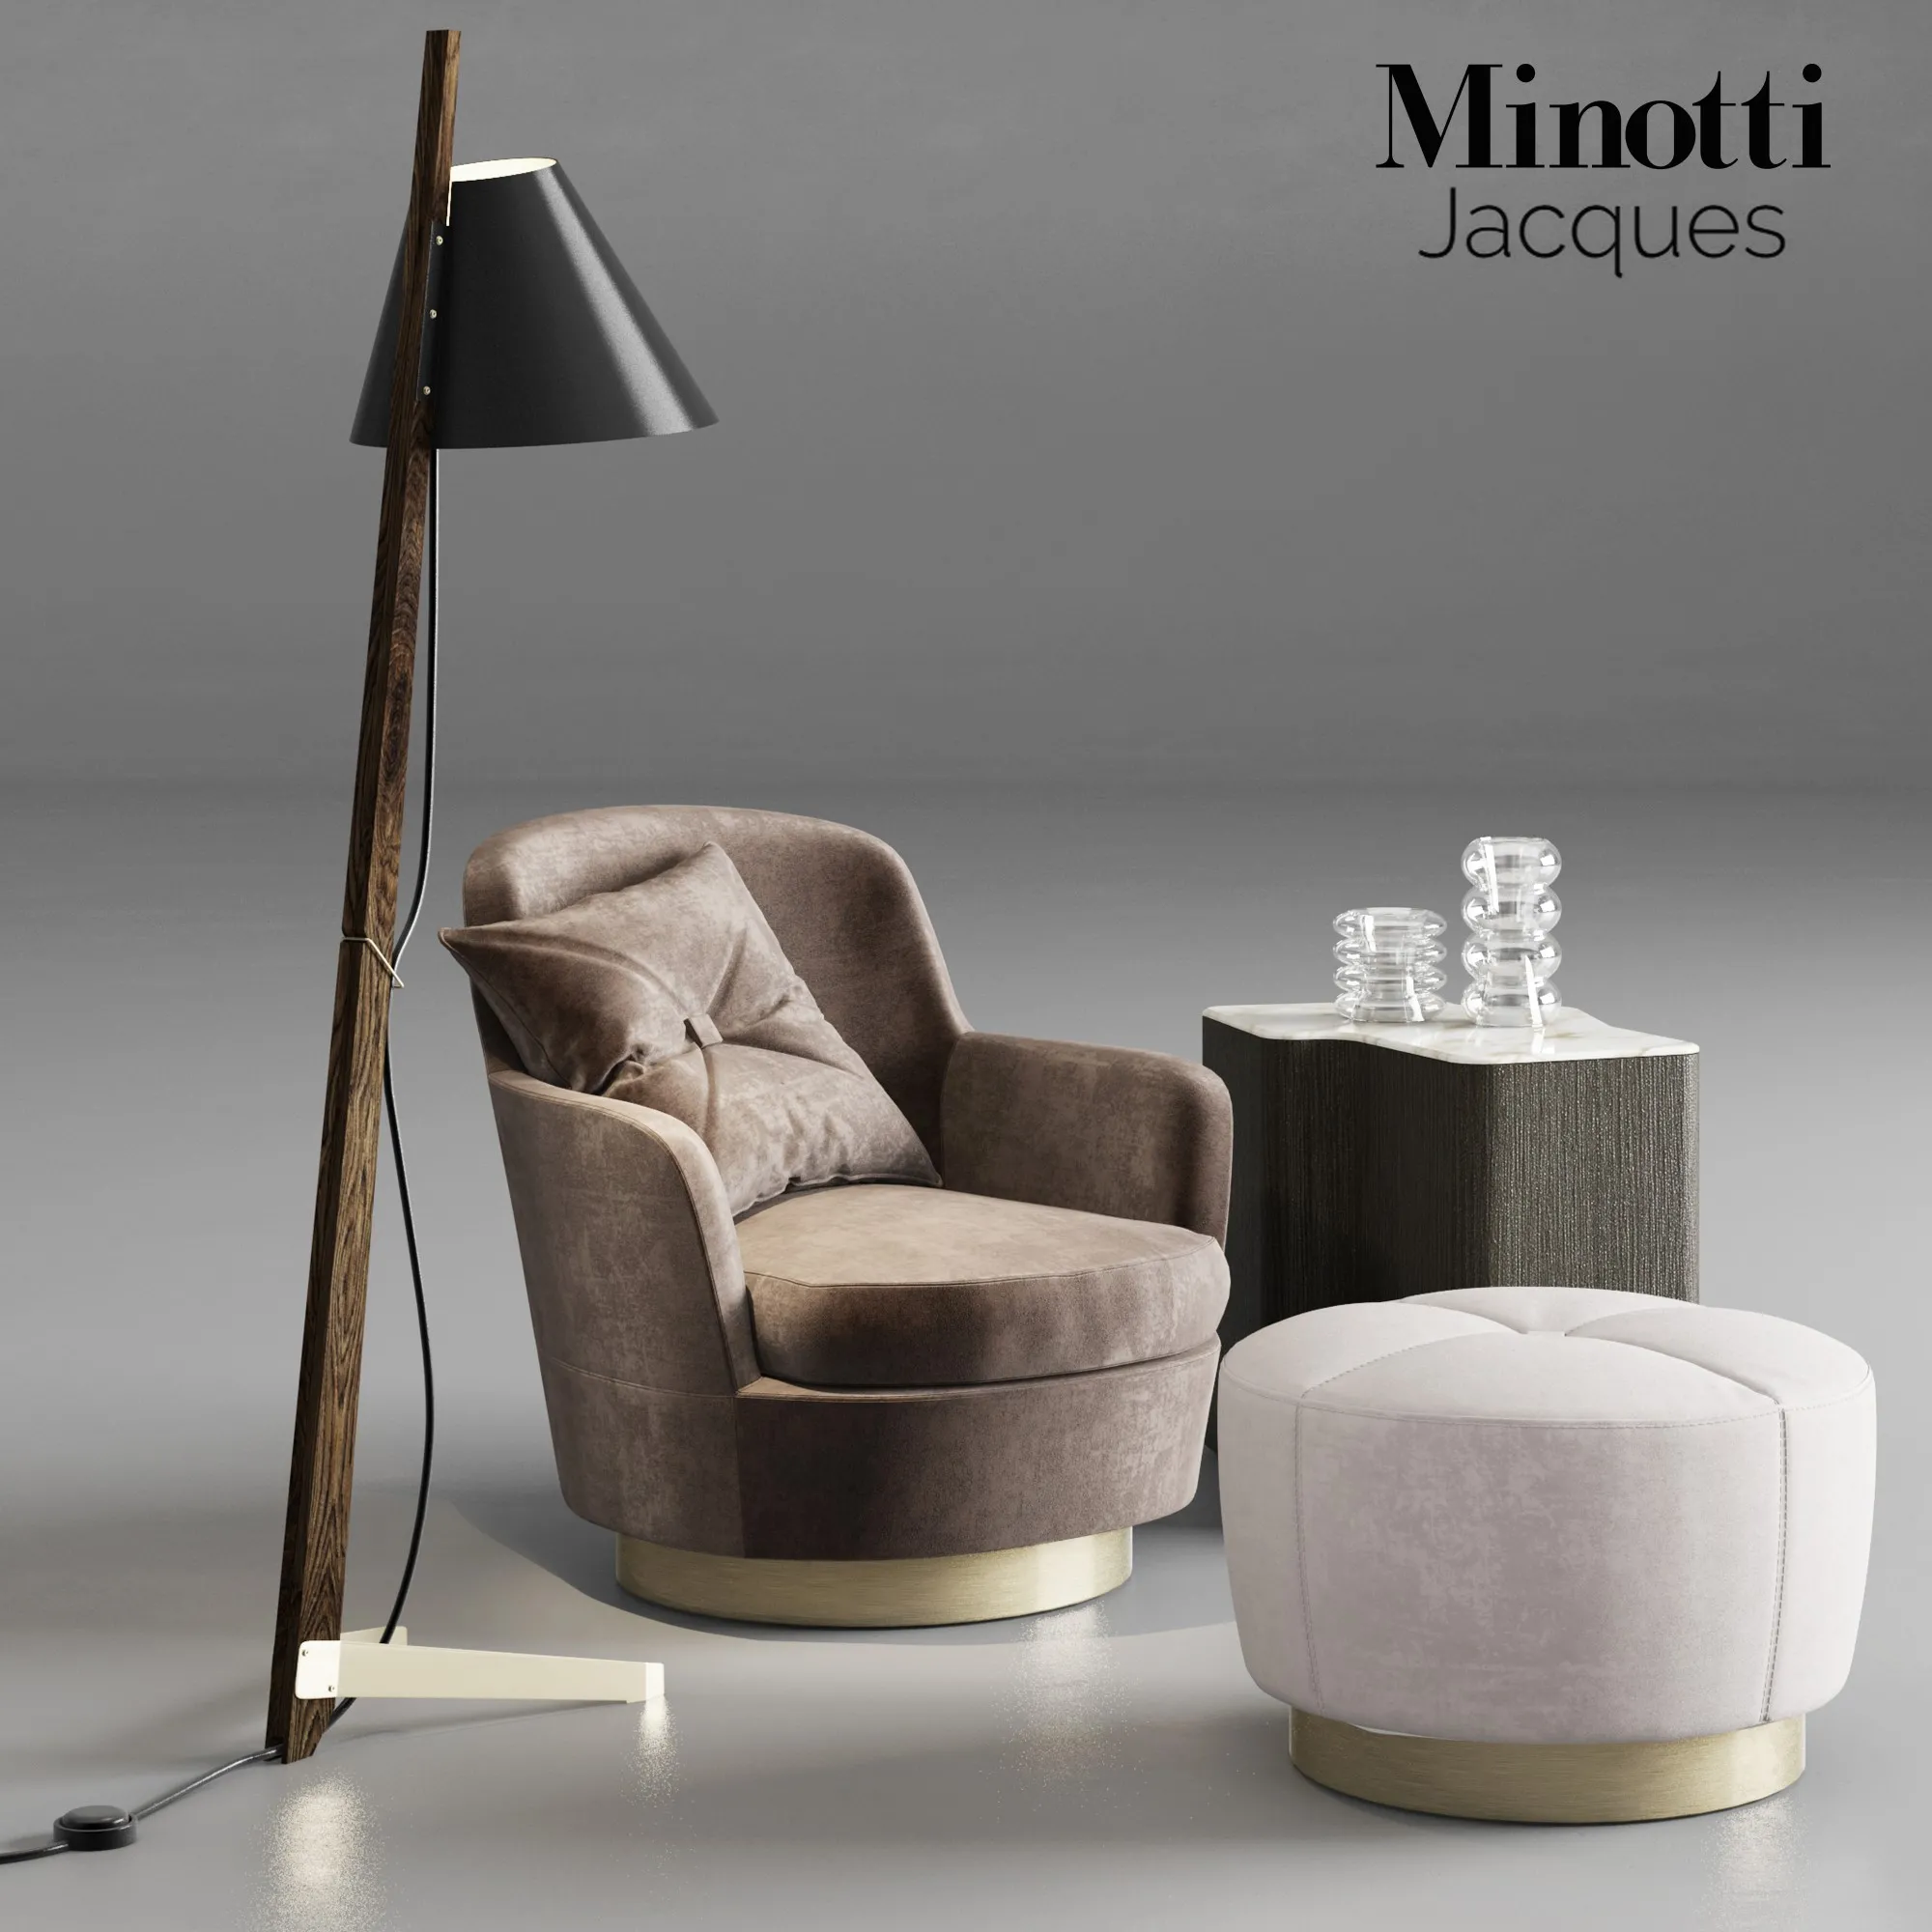 Armchair 3D Models – Minotti Jaques armchair with pouf and lamp